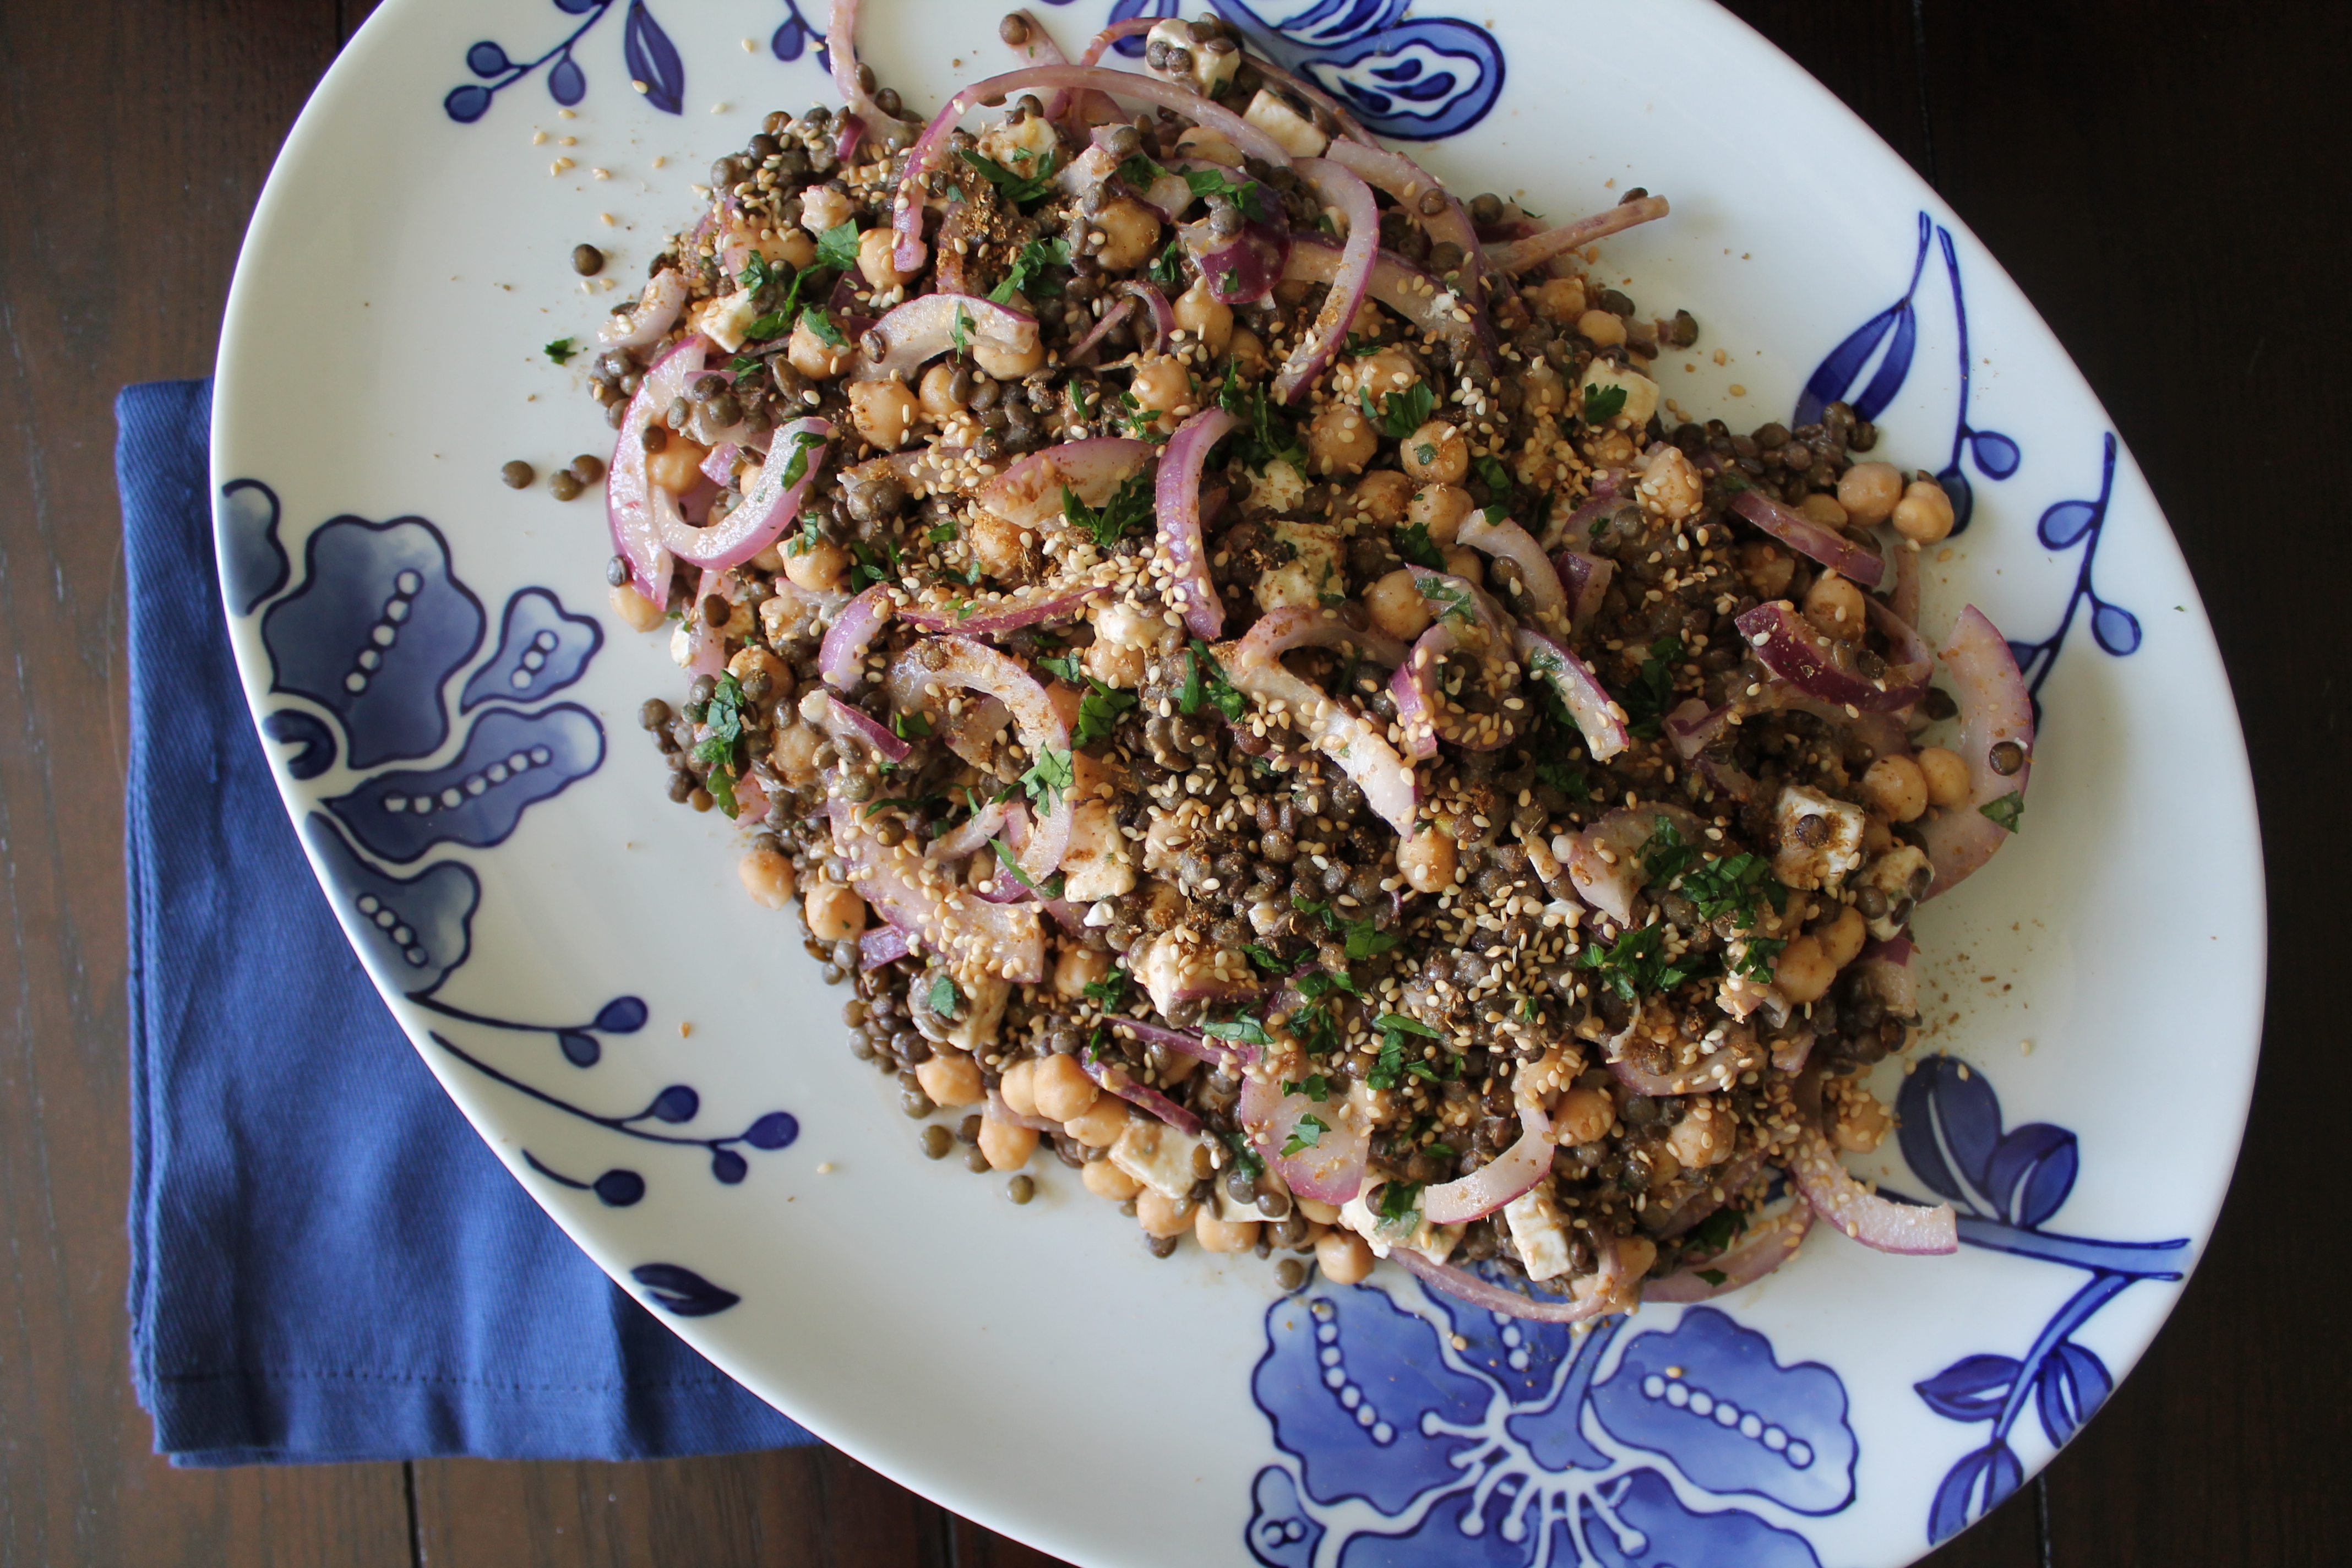 Lentil and Chickpea Salad with Feta and Tahini